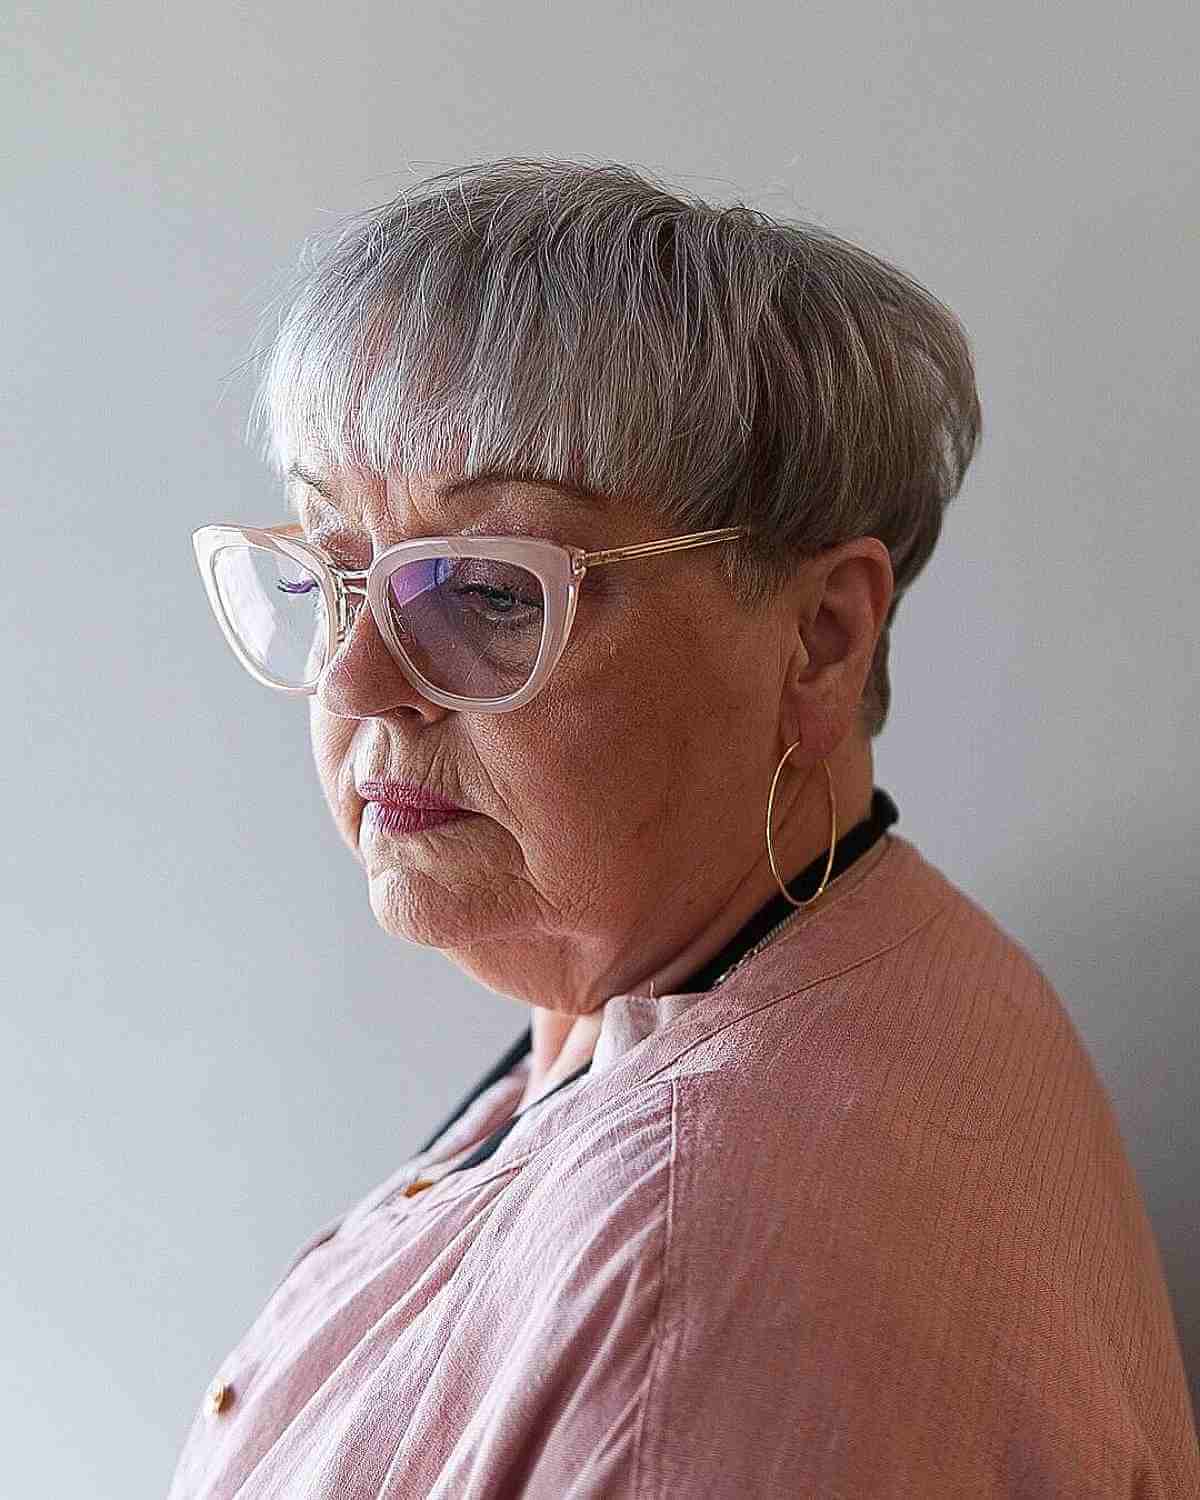 25 hairstyles for over 50 and overweight that are so cute - Tuko.co.ke